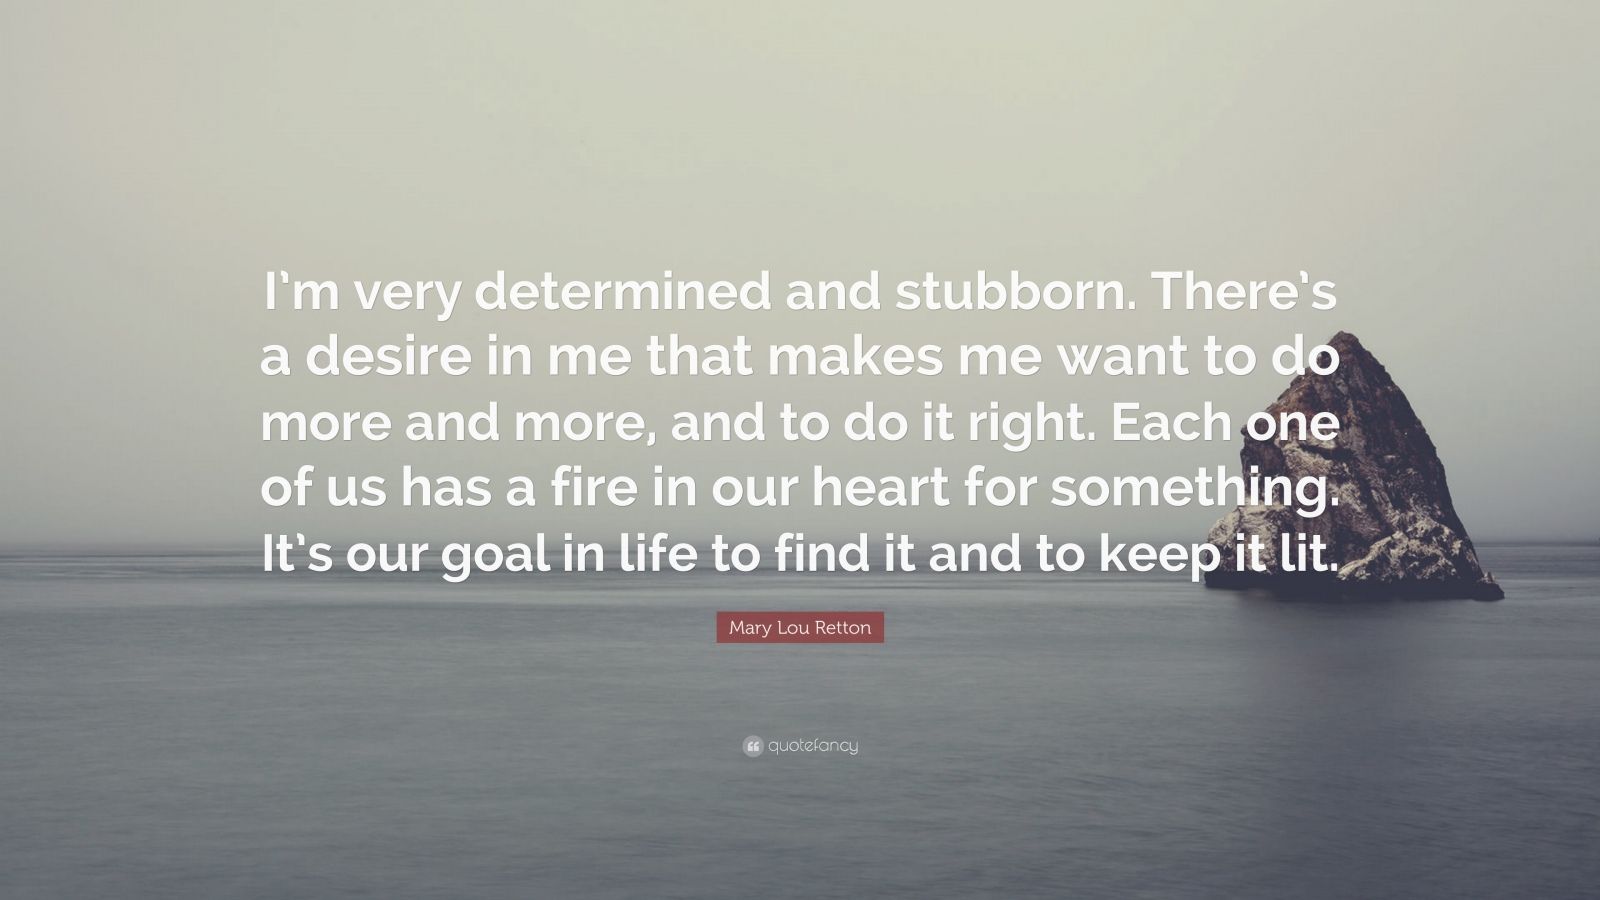 Mary Lou Retton Quote: "I'm very determined and stubborn. There's a desire in me that makes me ...